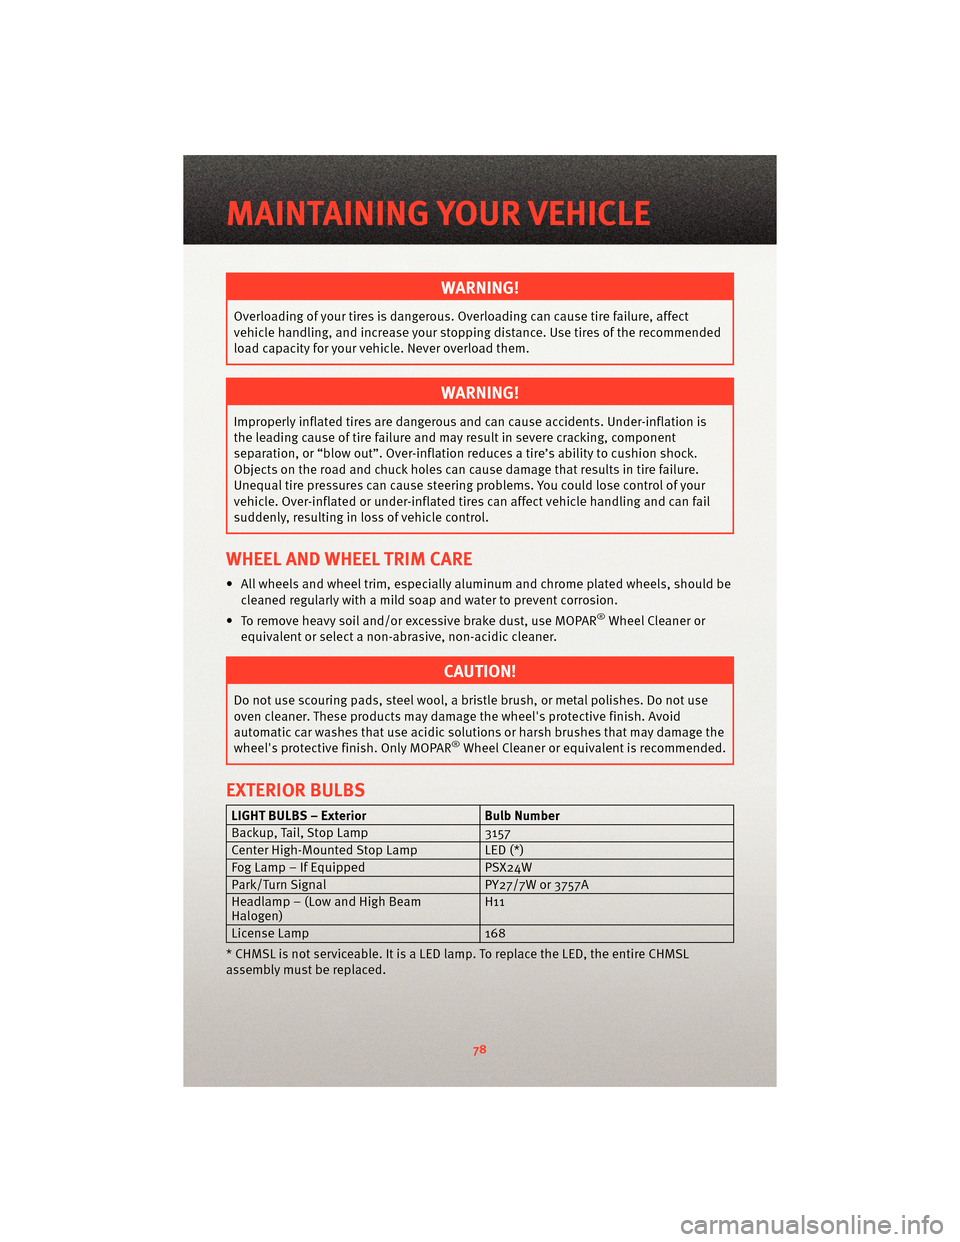 DODGE GRAND CARAVAN 2010 5.G User Guide WARNING!
Overloading of your tires is dangerous. Overloading can causetire failure, affect
vehicle handling, and increase your stopping distance. Use tires of the recommended
load capacity for your ve